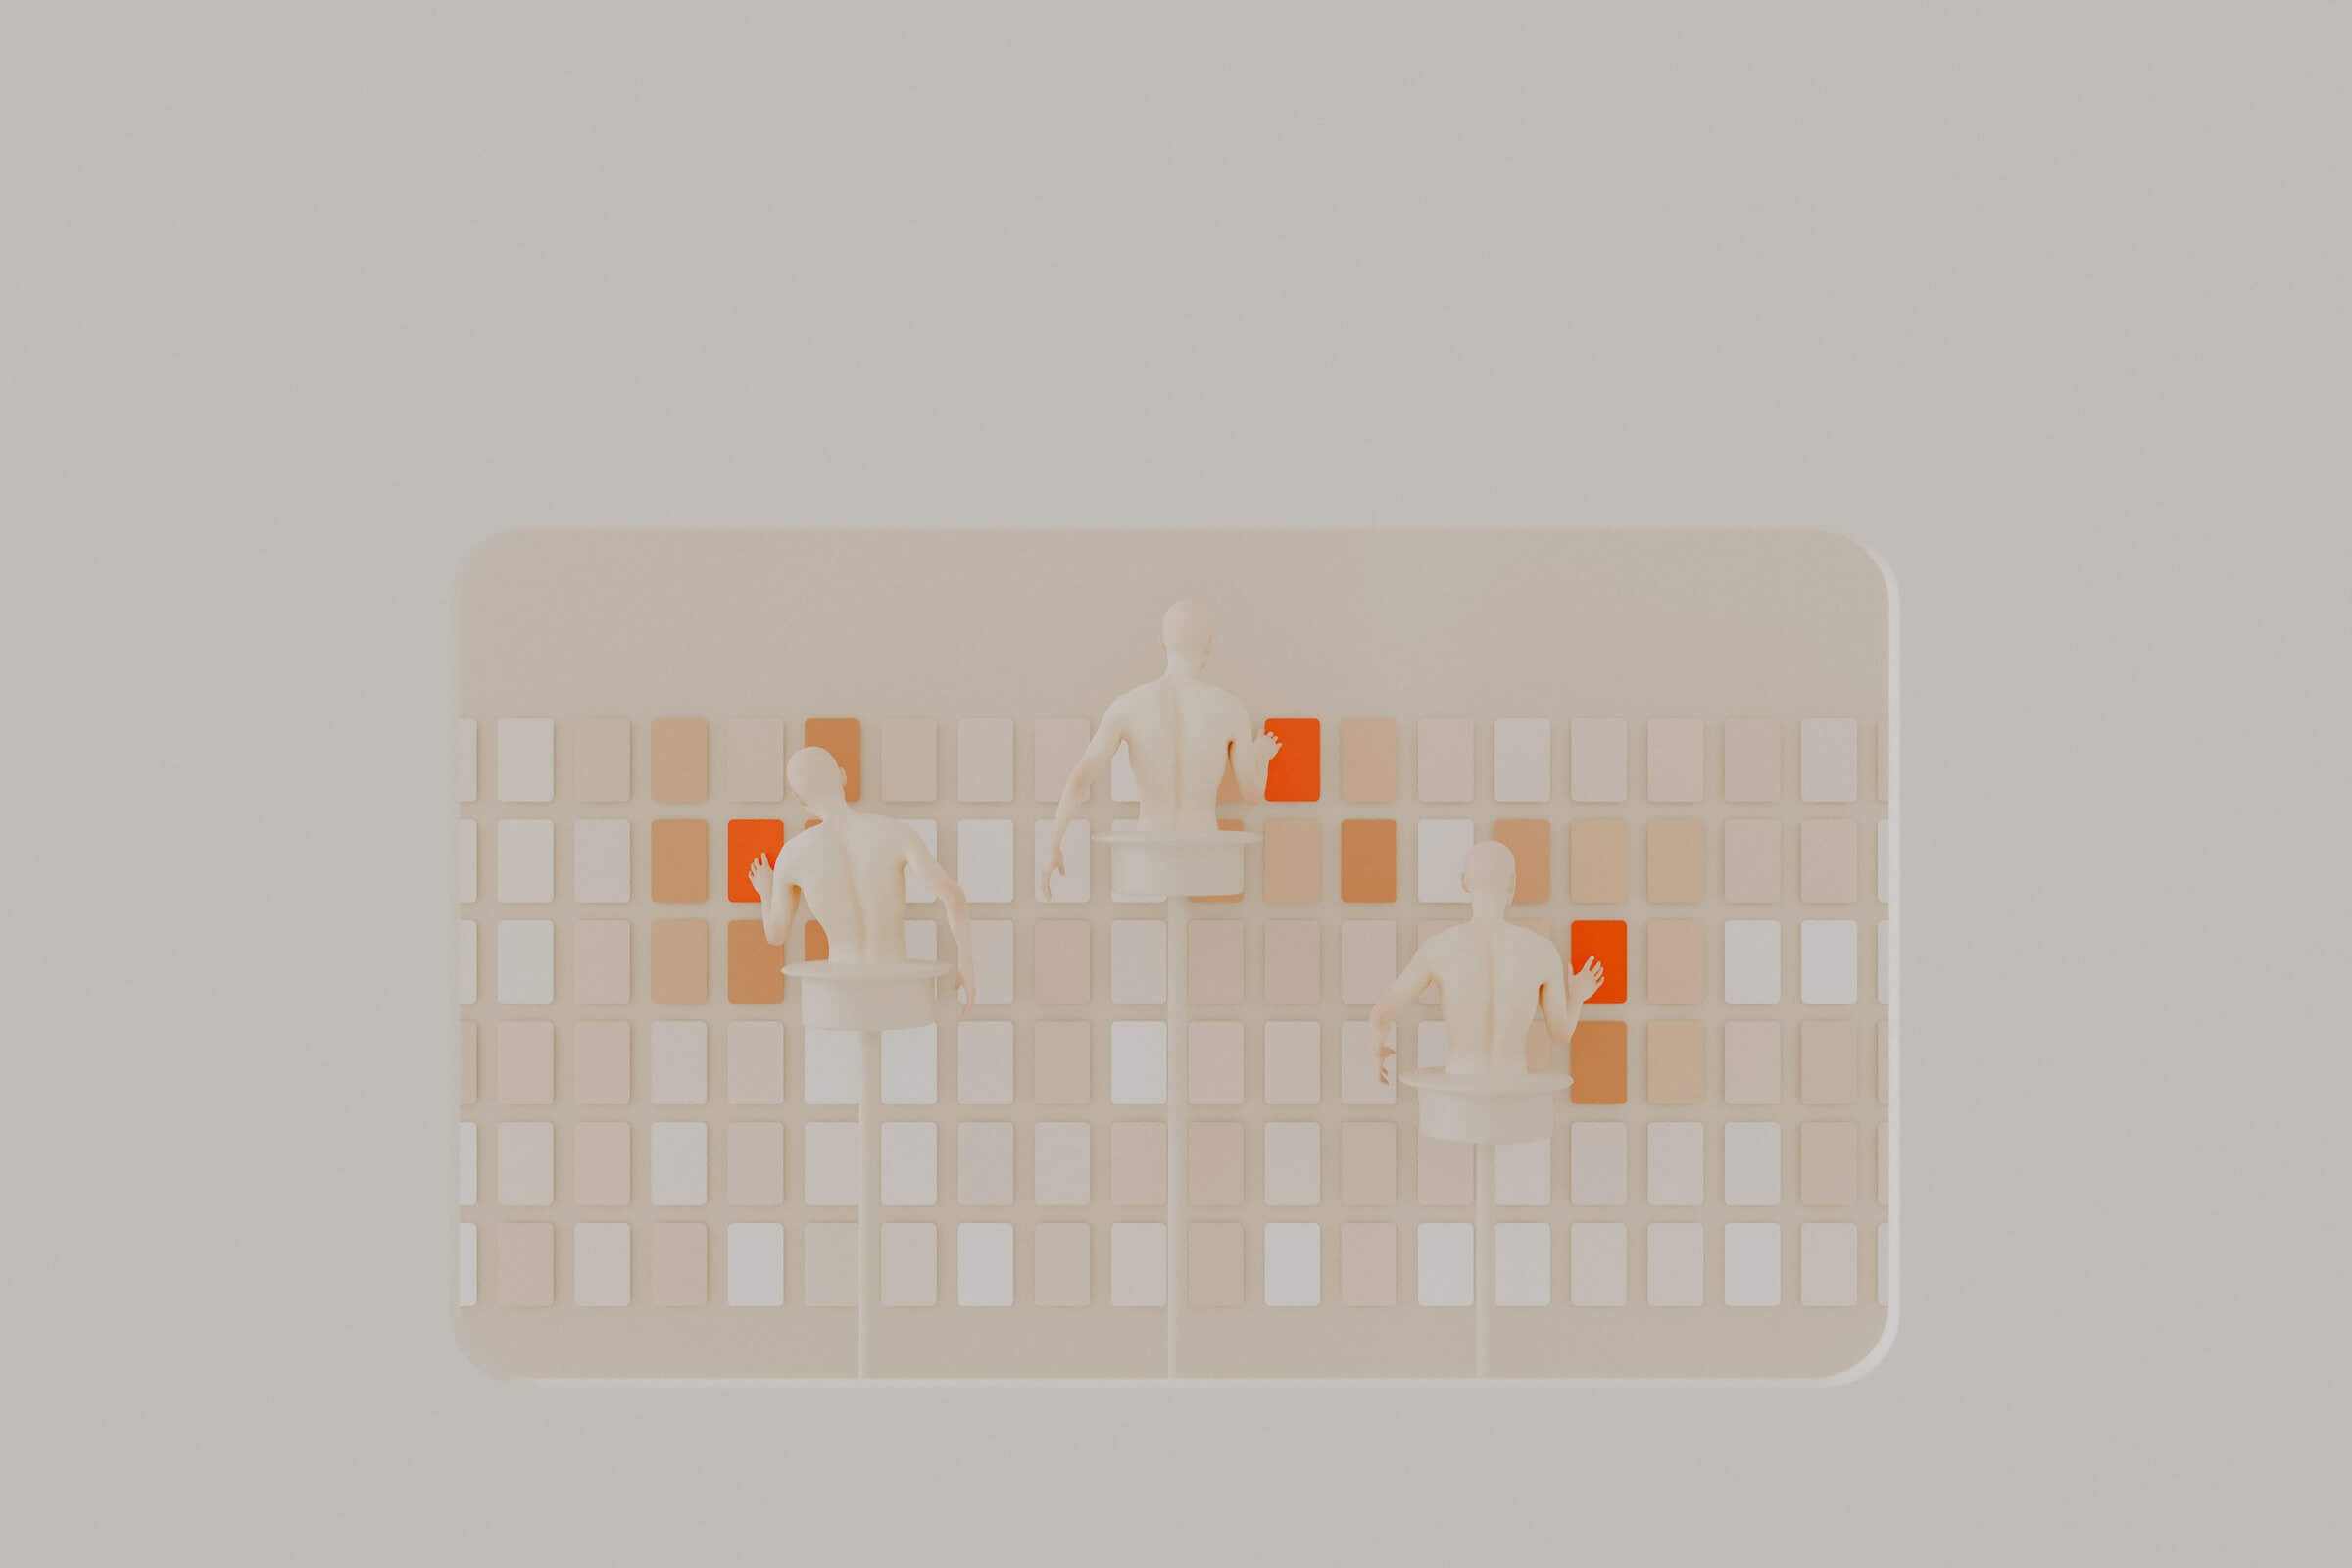 Drawing of Keyboard with White, Beige, Ecru and Orange Keys, and Three Small Figures Pressing on the Orange Keys